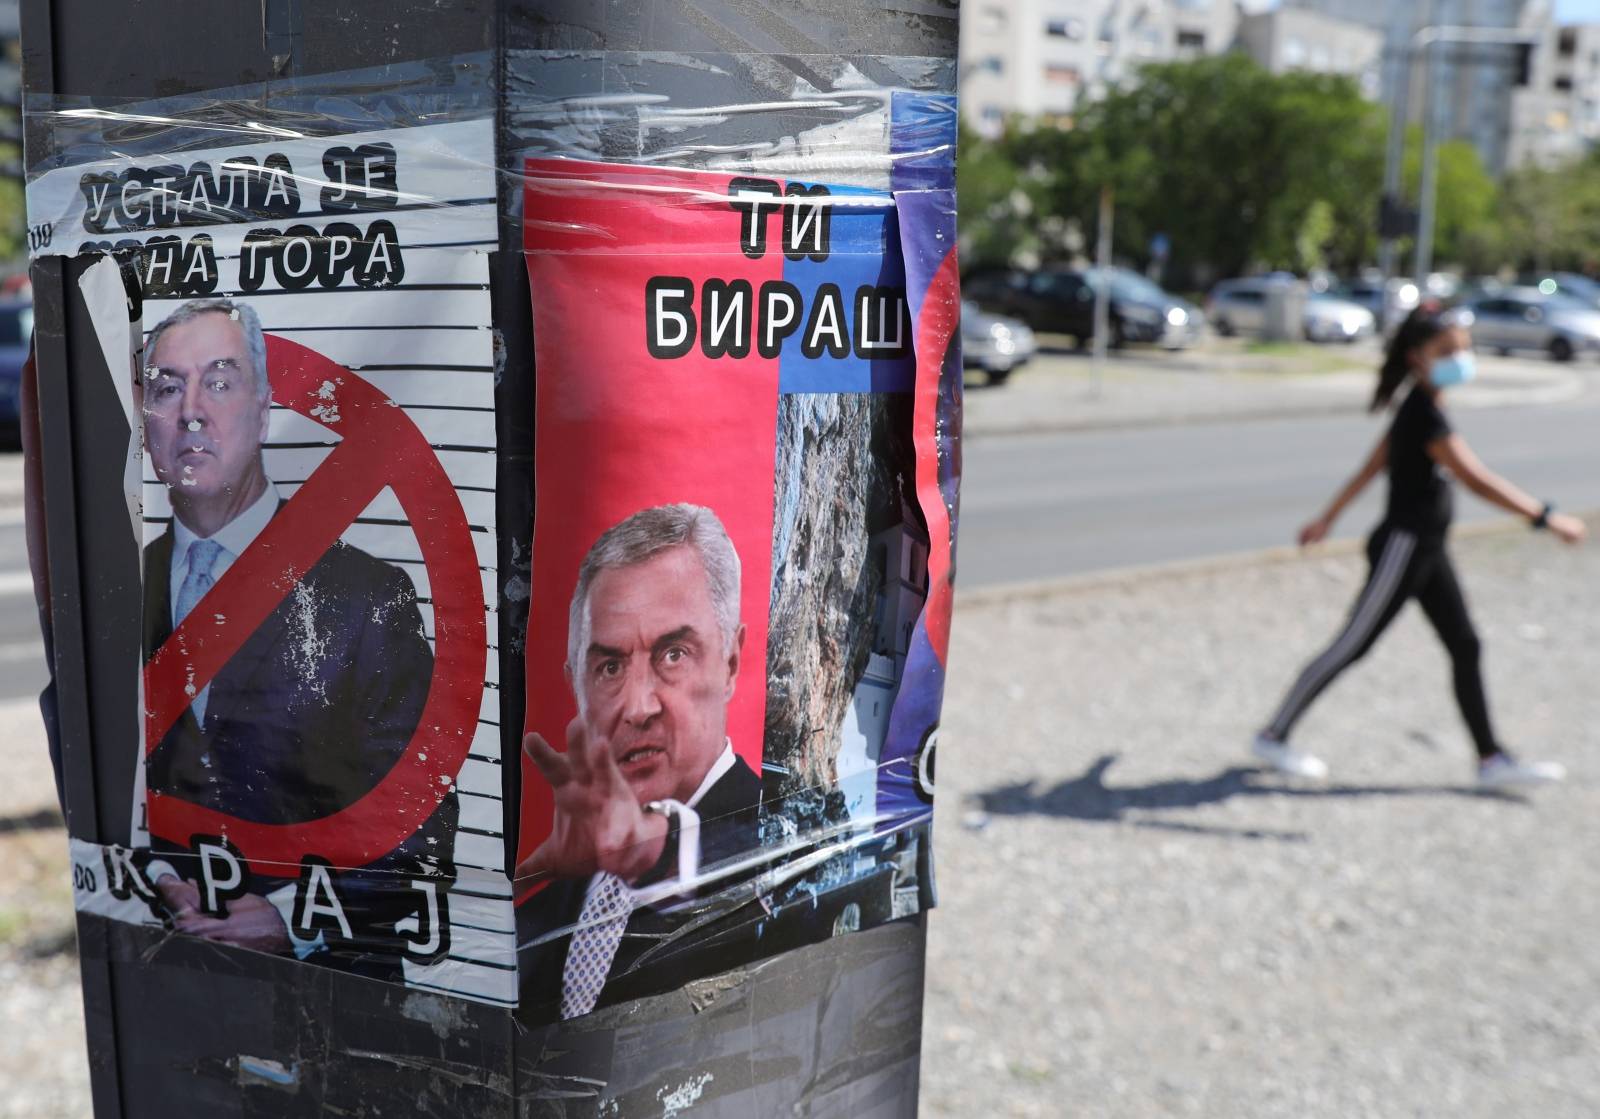 A woman walks near an anti Montenegro President Milo Djukanovic poster ahead of Montenegrin Assembly election in Podgorica